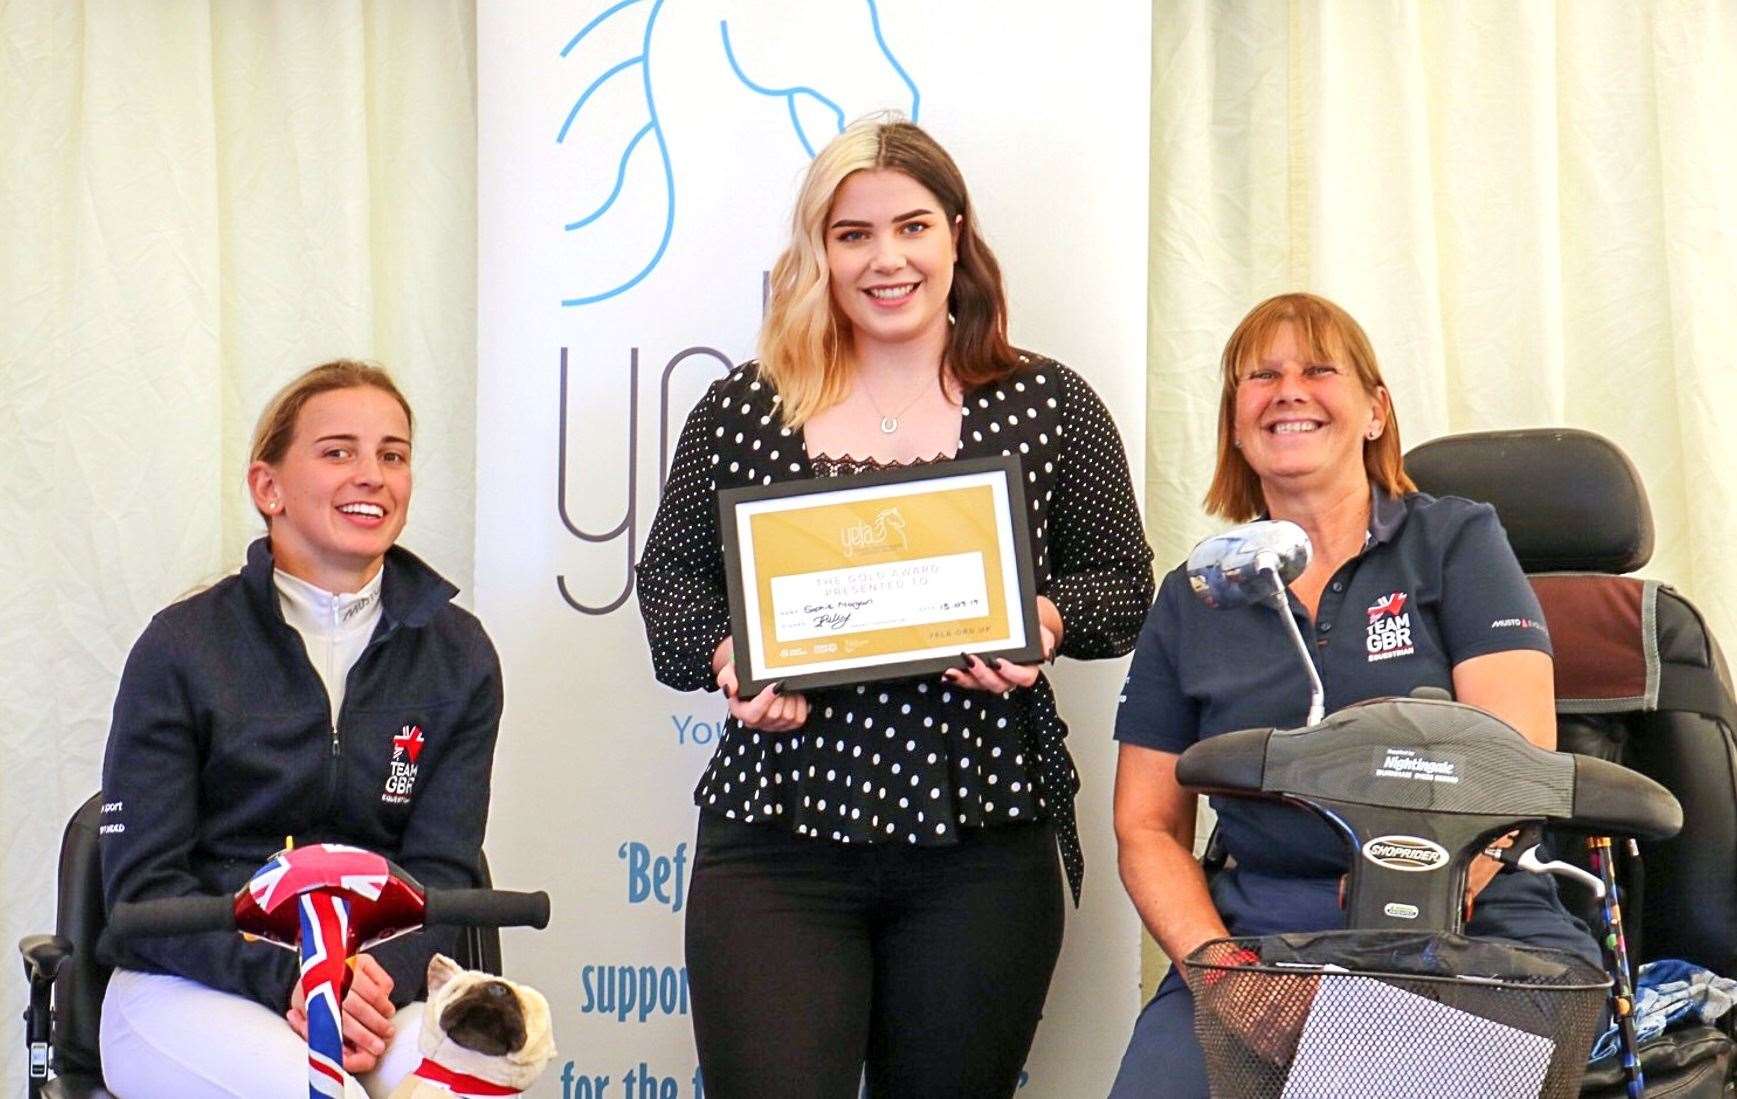 Sophie Morgan receives her YELA gold award from Equestrian Team GBR para riders Georgia Wilson (left) and Julie Payne.